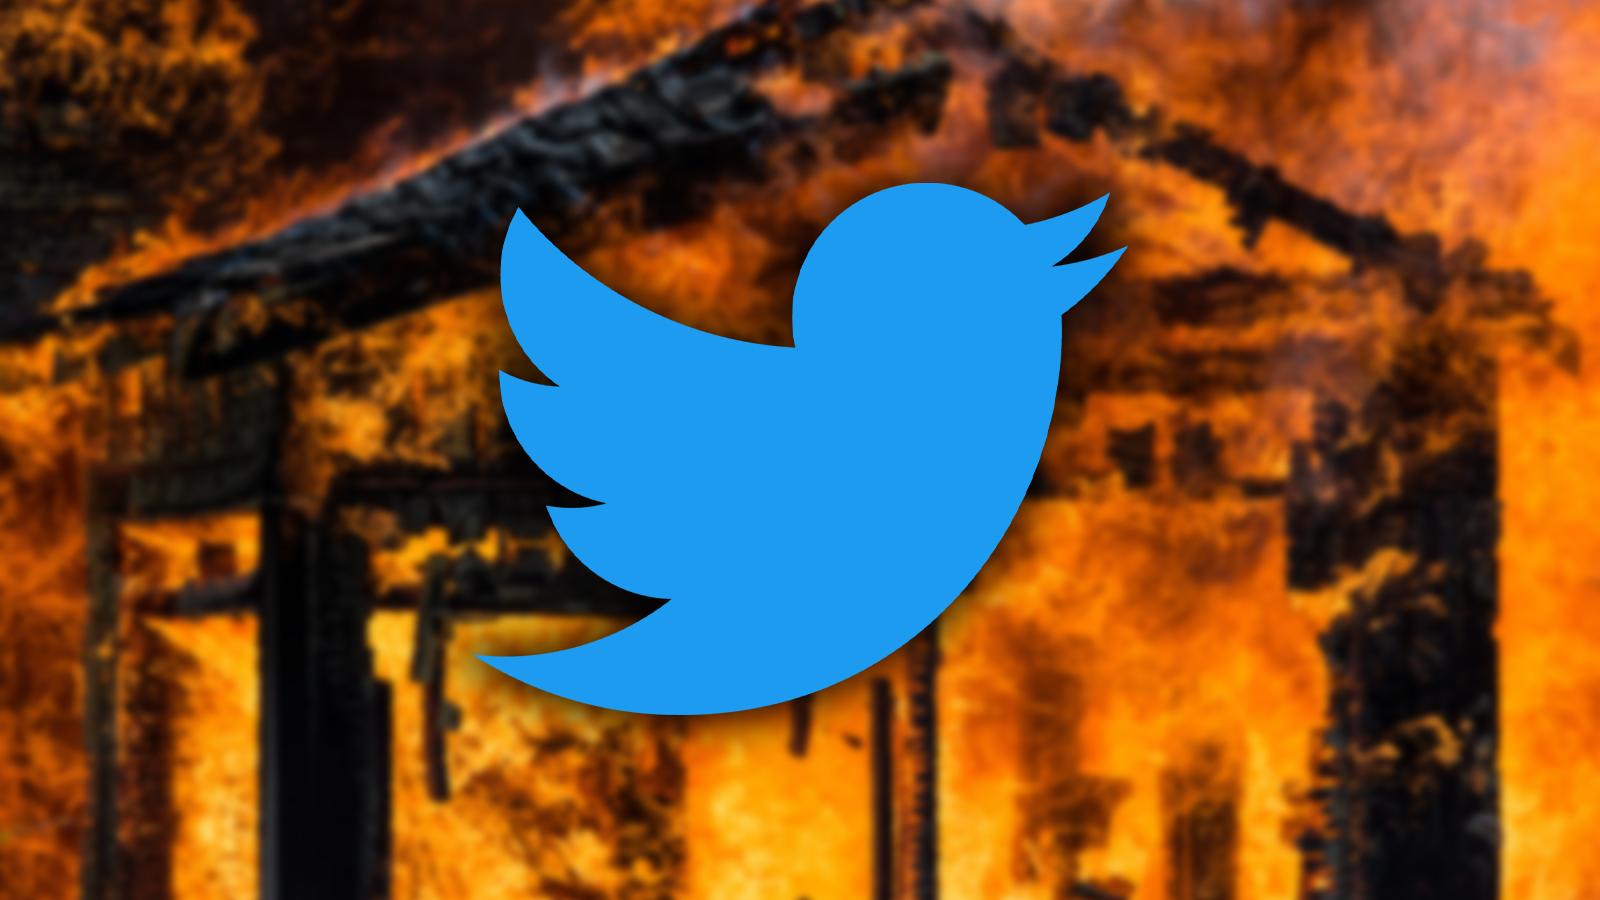 Twitter logo with house burning in background